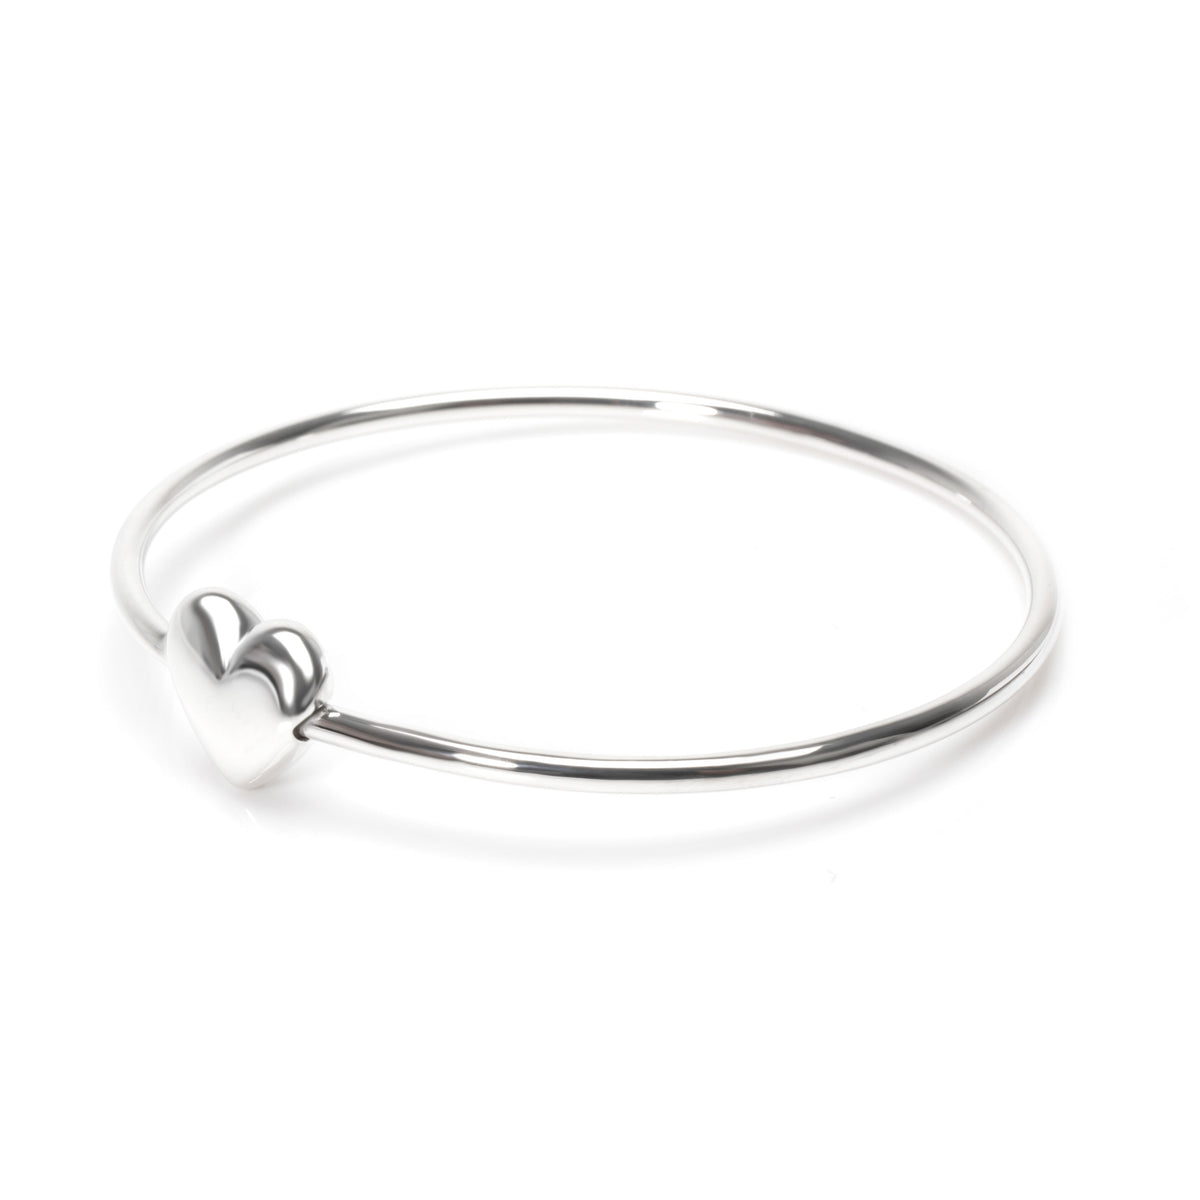 Tiffany & Co. Puffed Heart Bangle in Sterling Silver